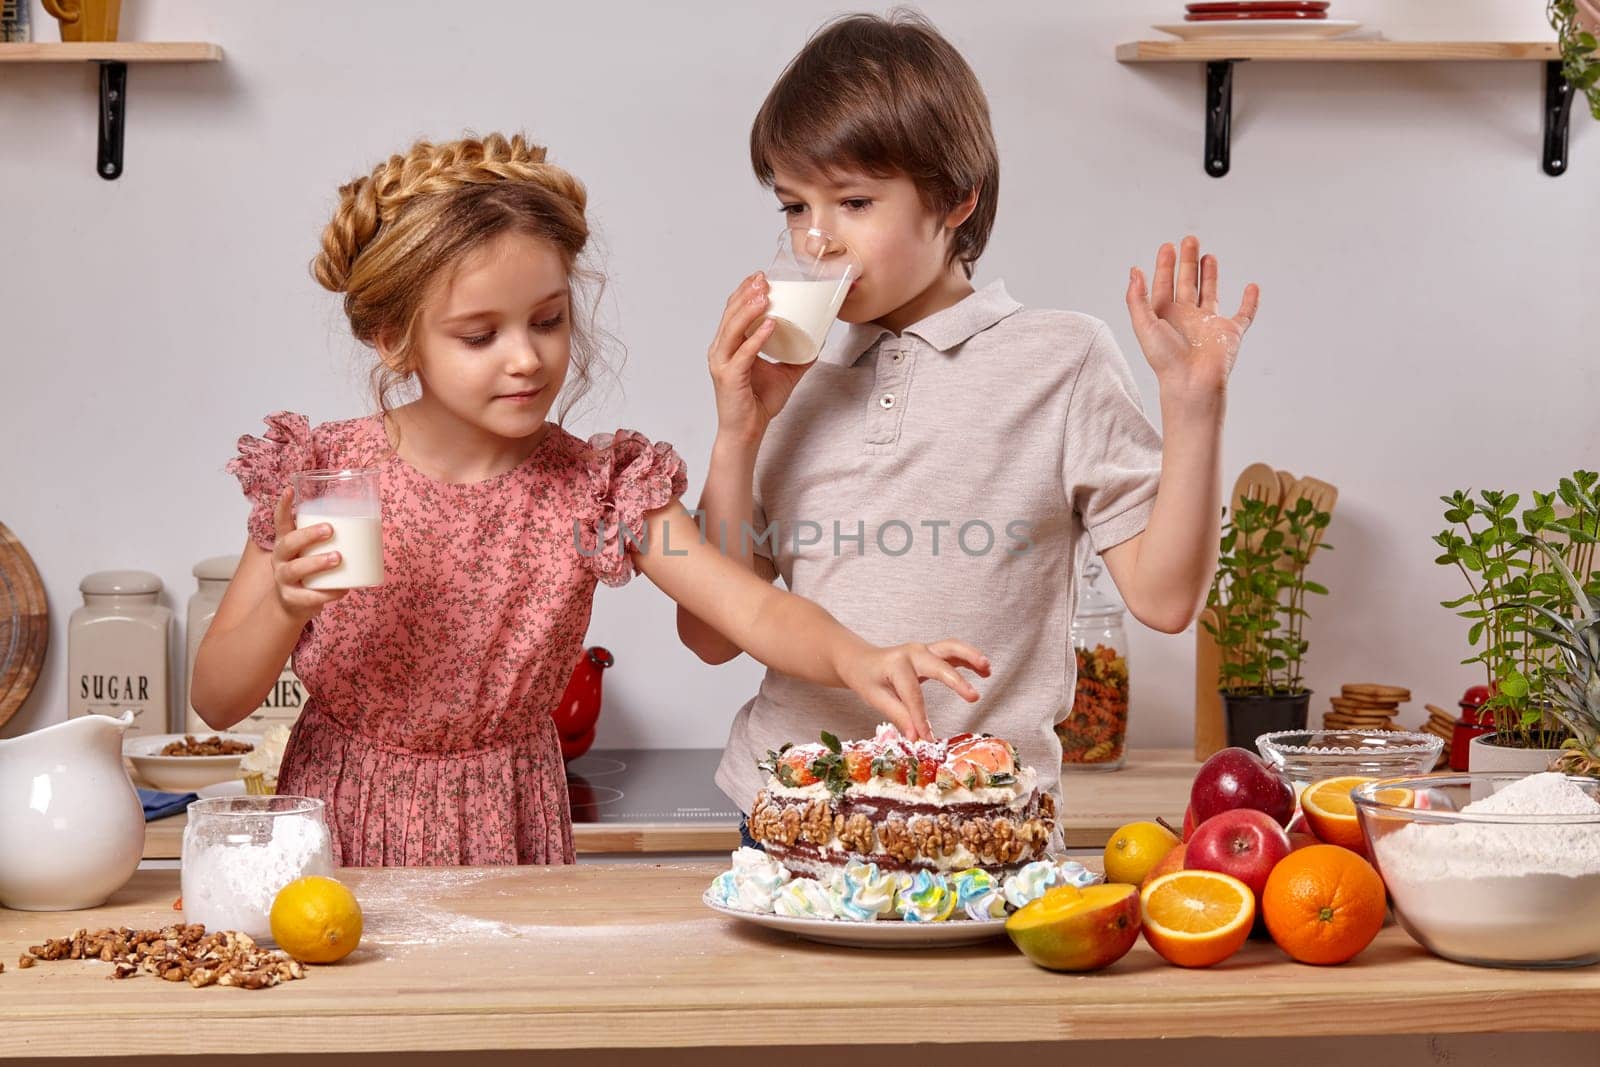 Kid dressed in a light t-shirt and jeans and a beautiful little lady wearing in a pink dress are making a cake at a kitchen, against a white wall with shelves on it. Boy is drinking milk and girl is touching the cake.